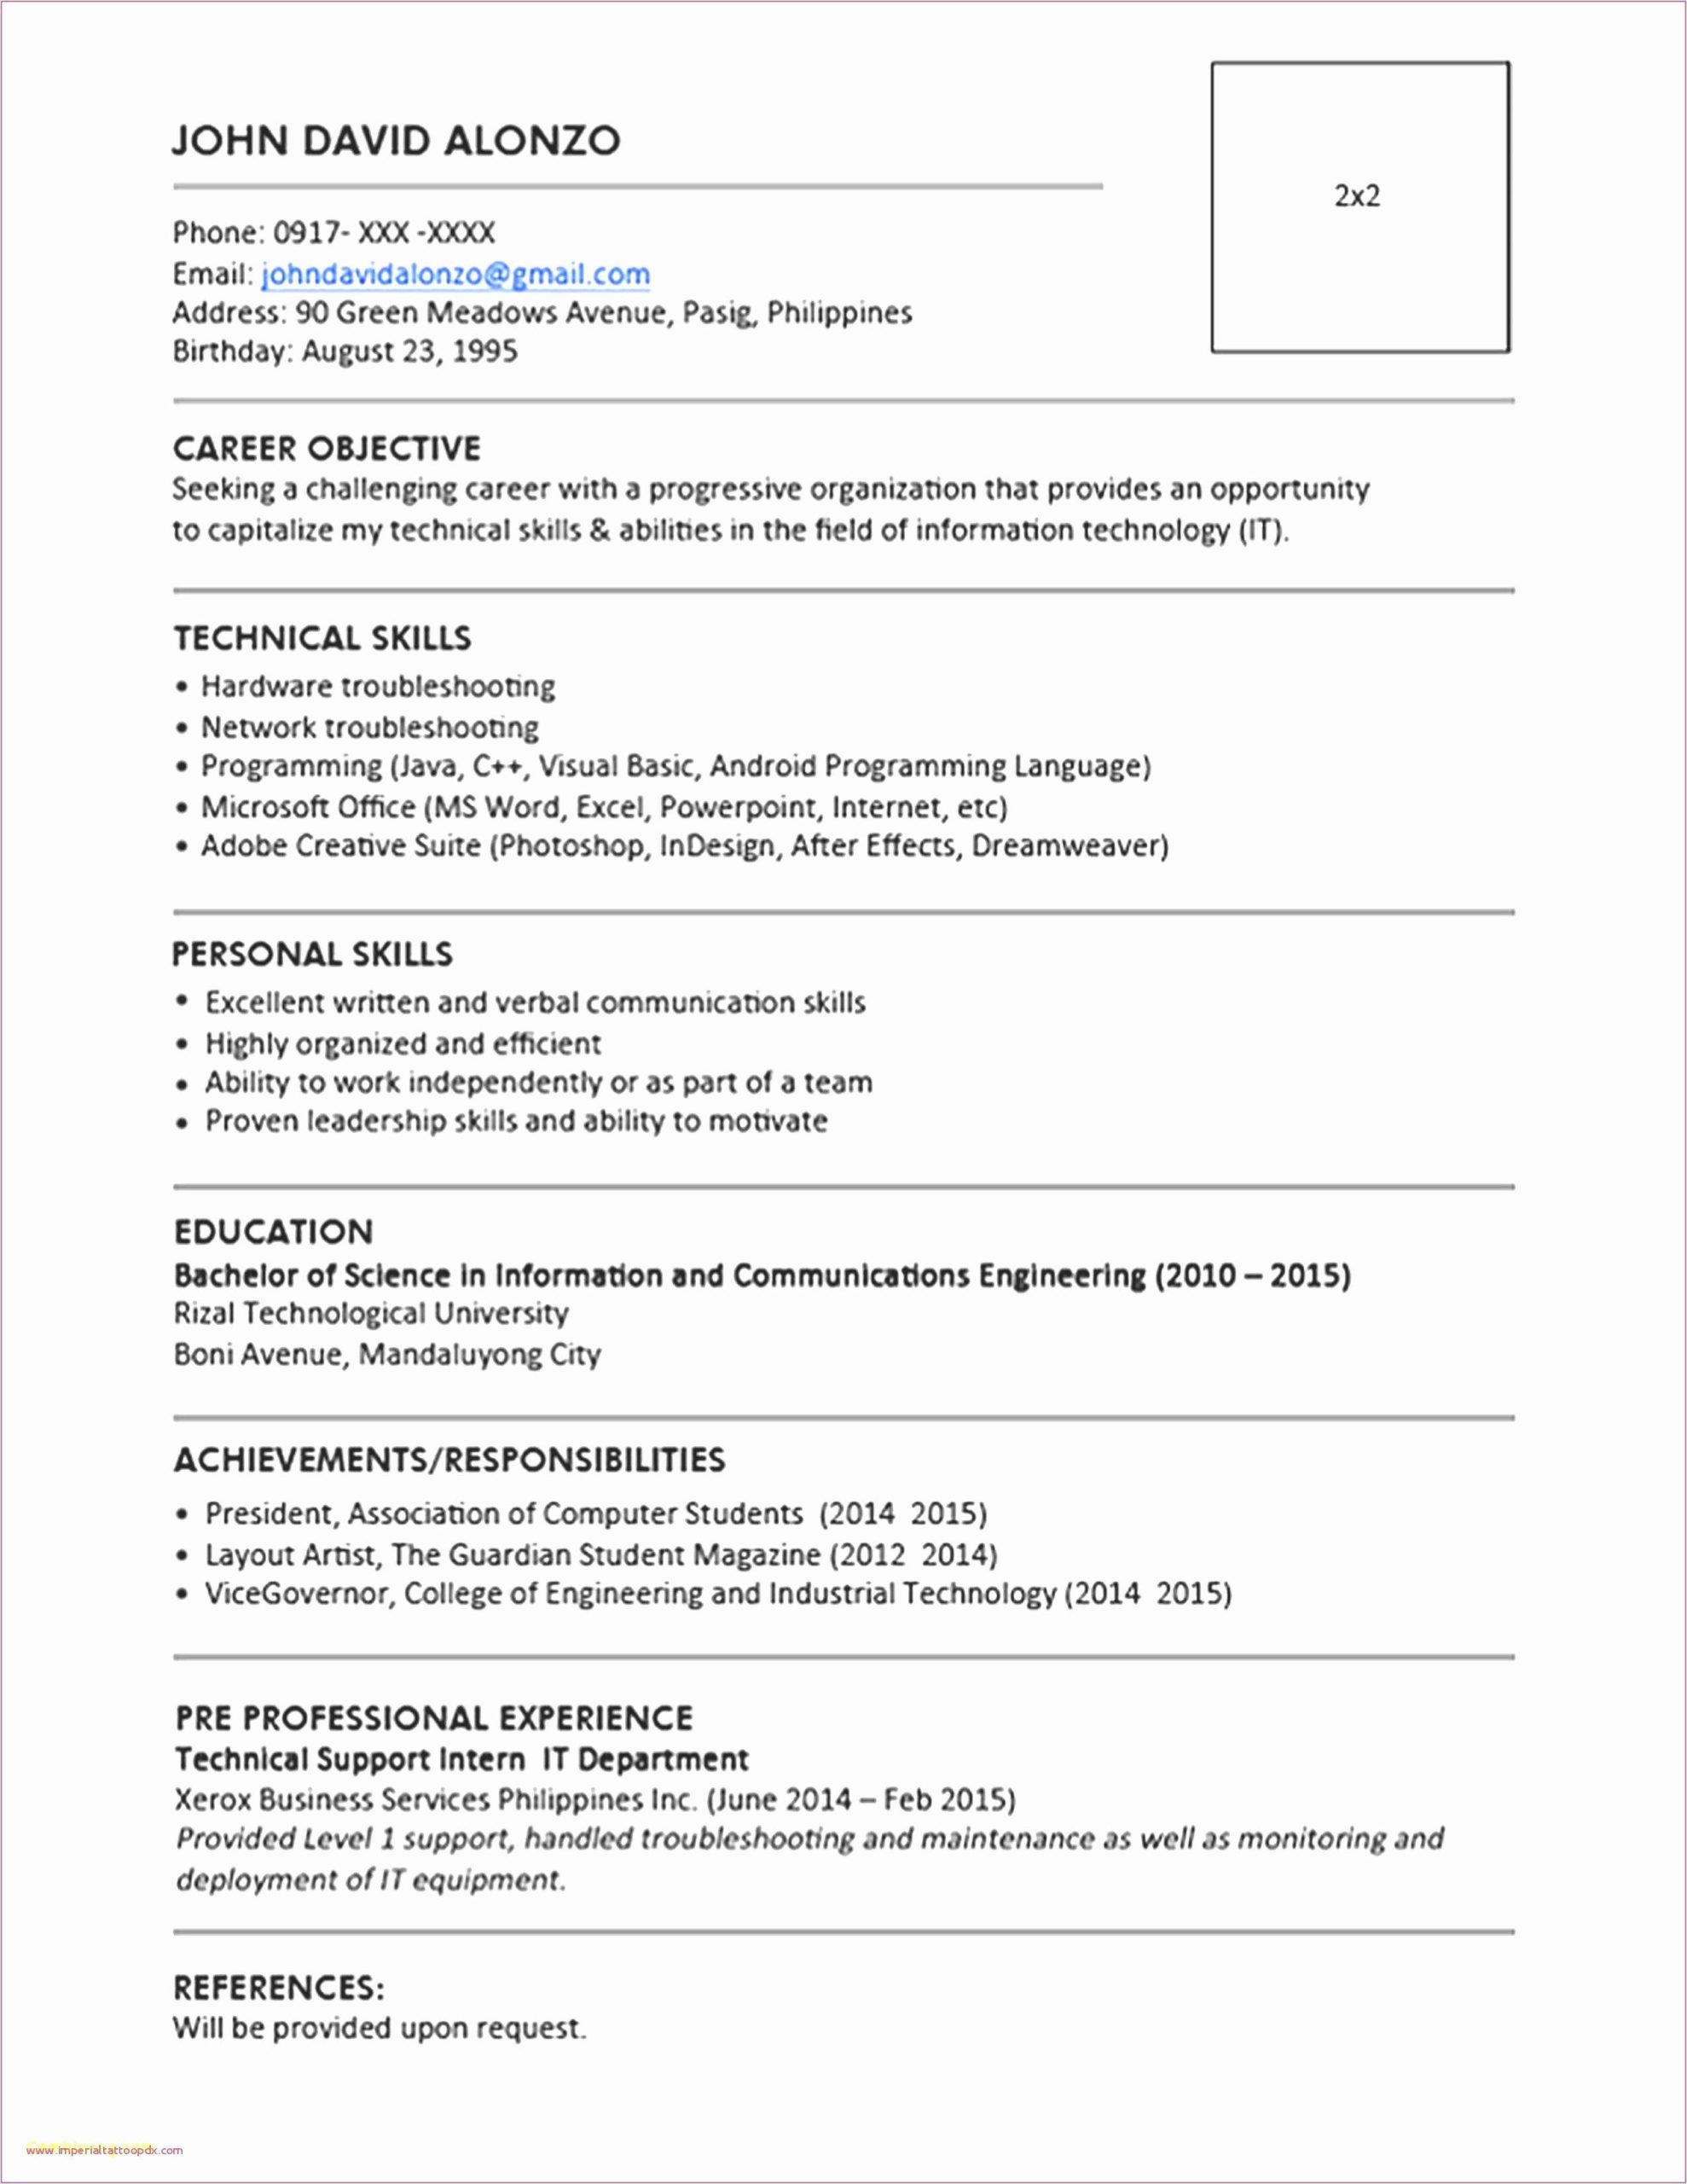 Sample Of Resume with 2×2 Picture Resume Template: Resume Template with 2×2 Picture